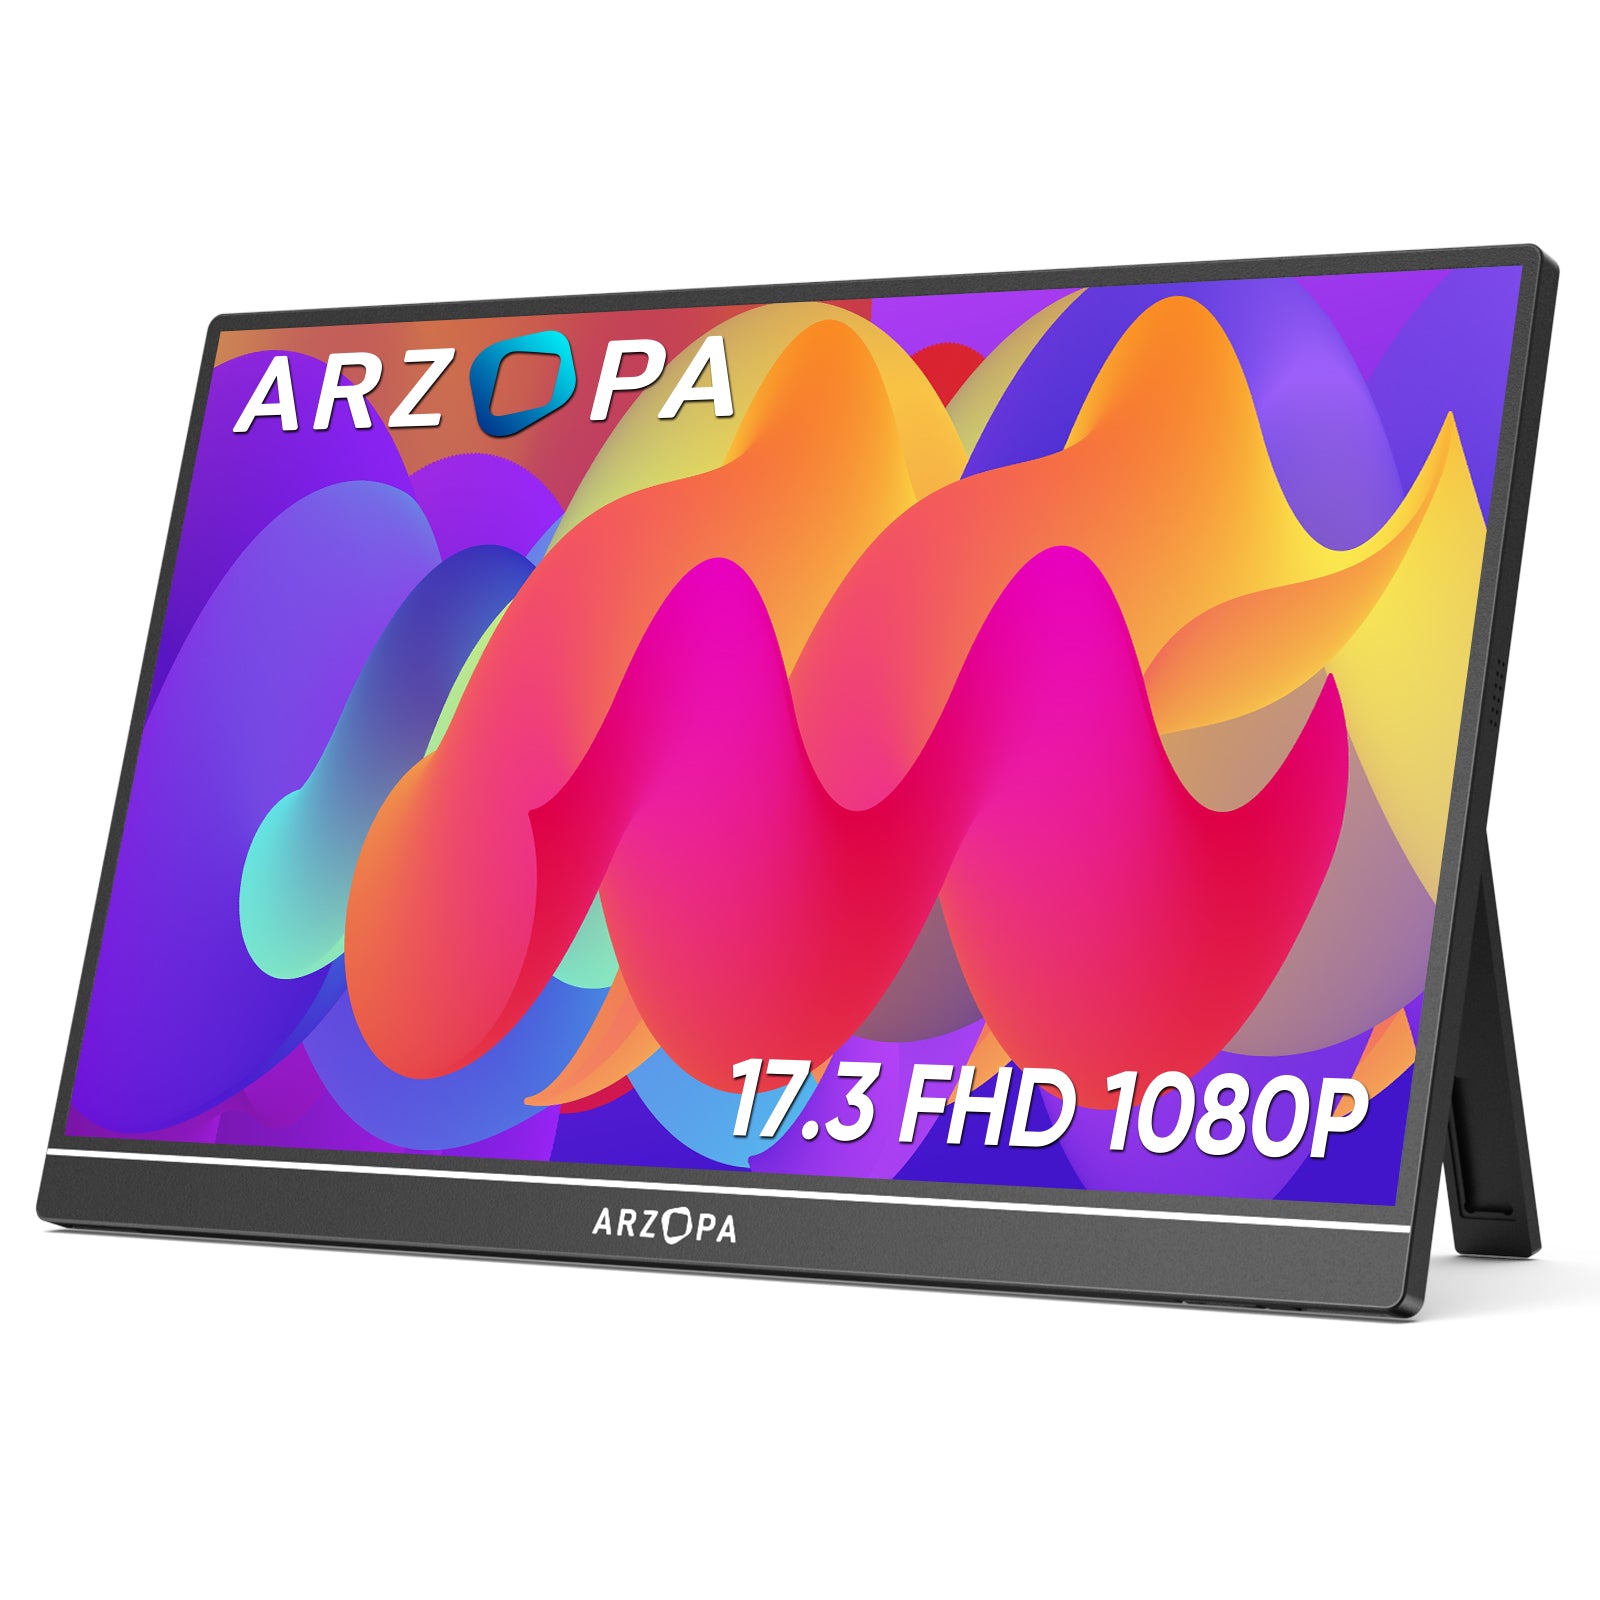 Monitor portátil Arzopa A1 Gamut 15,6 FHD - PC/XBOX/PS5/SWITCH